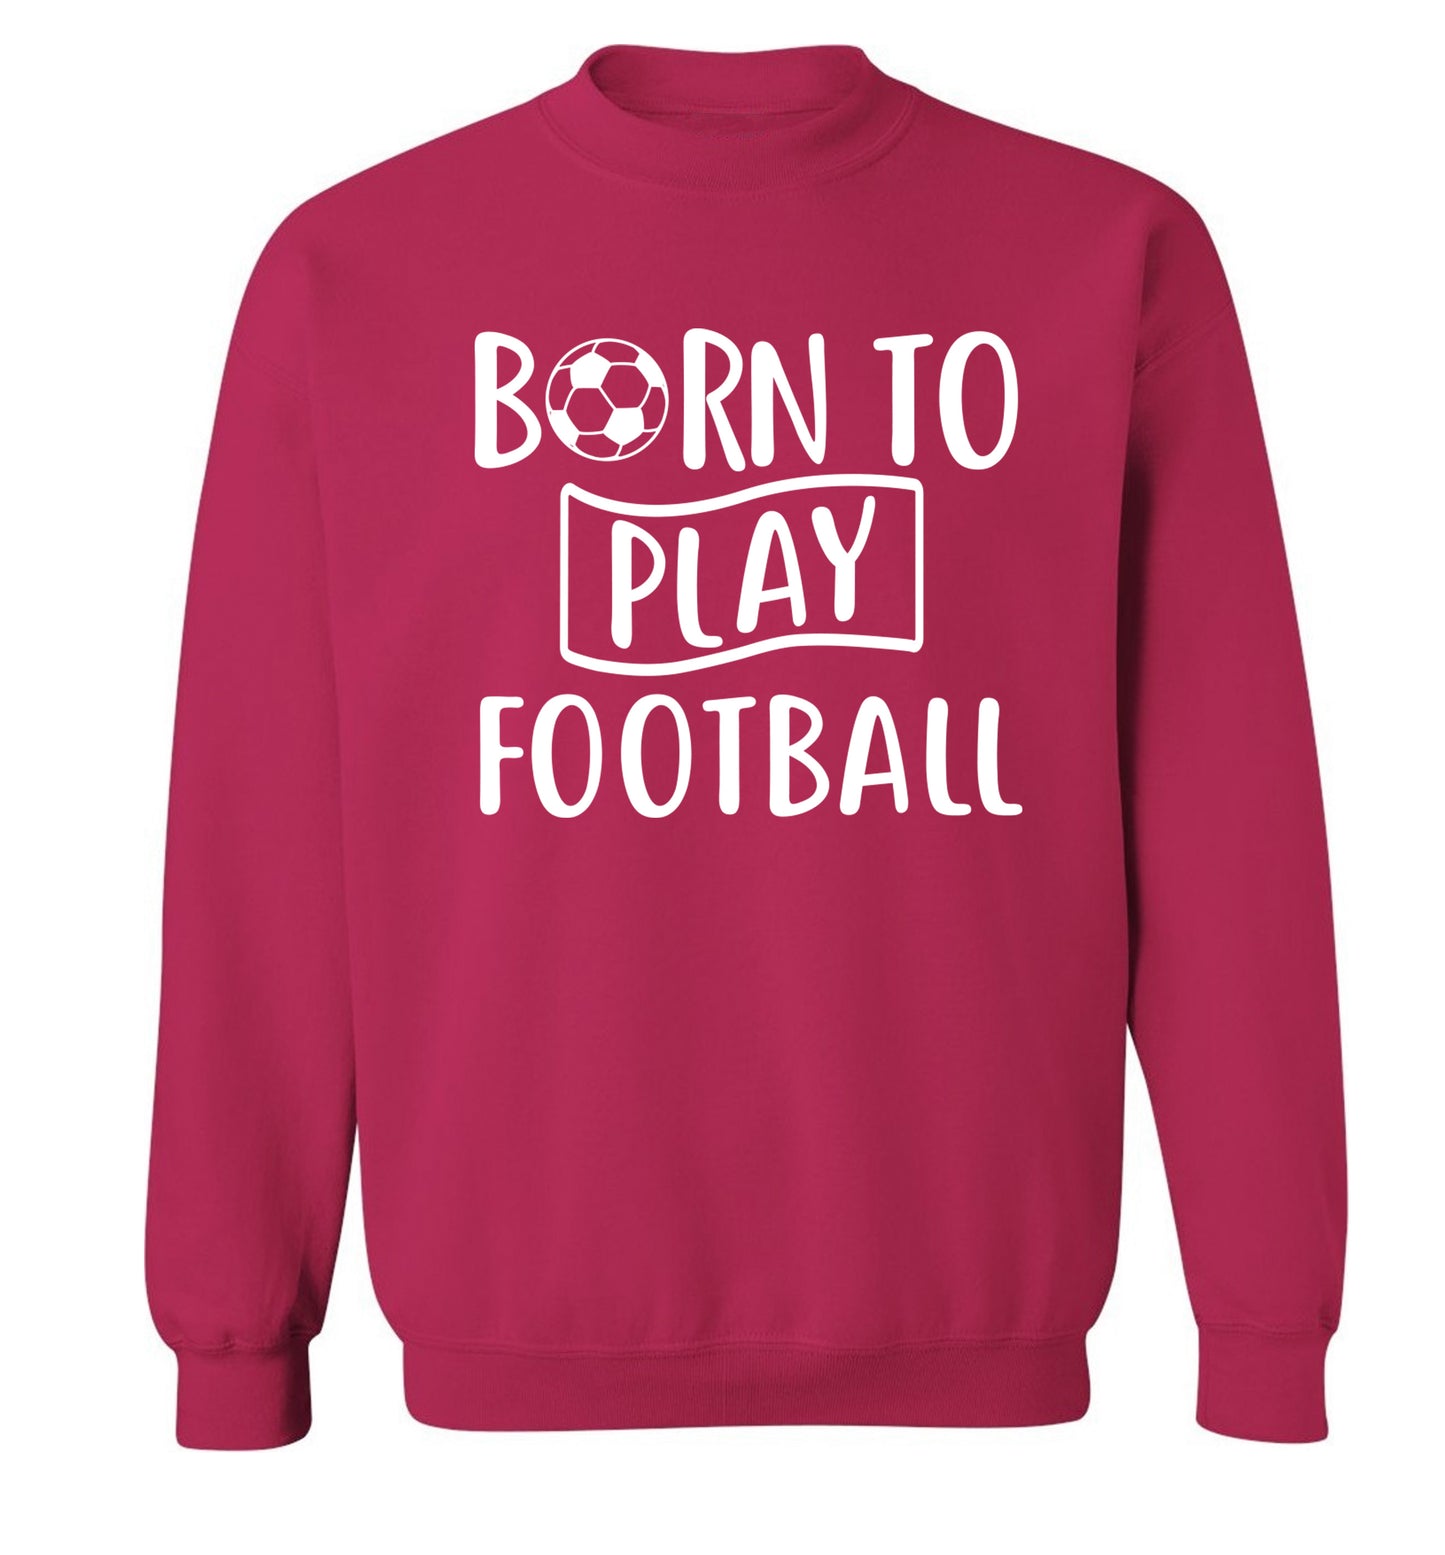 Born to play football Adult's unisexpink Sweater 2XL